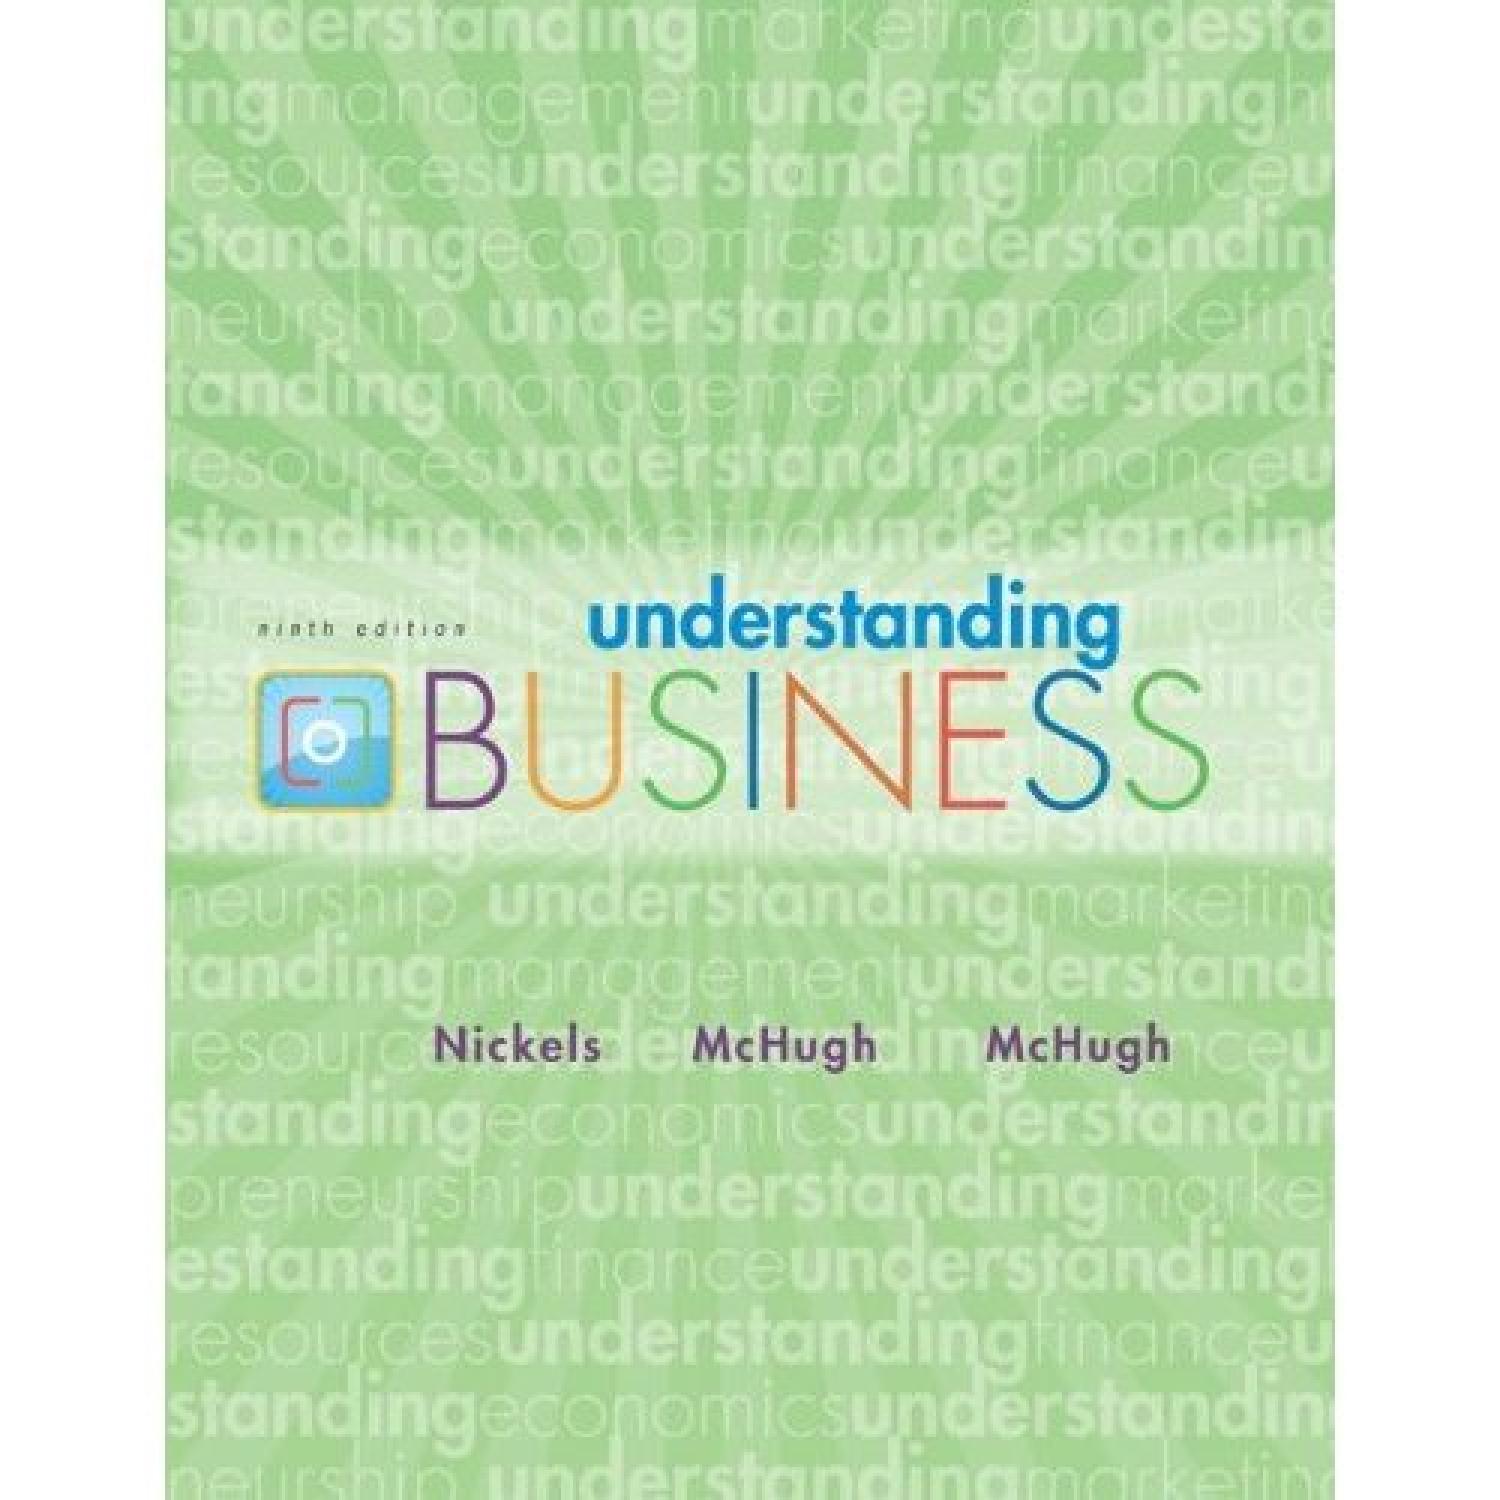 Understanding Business, 9th Edition